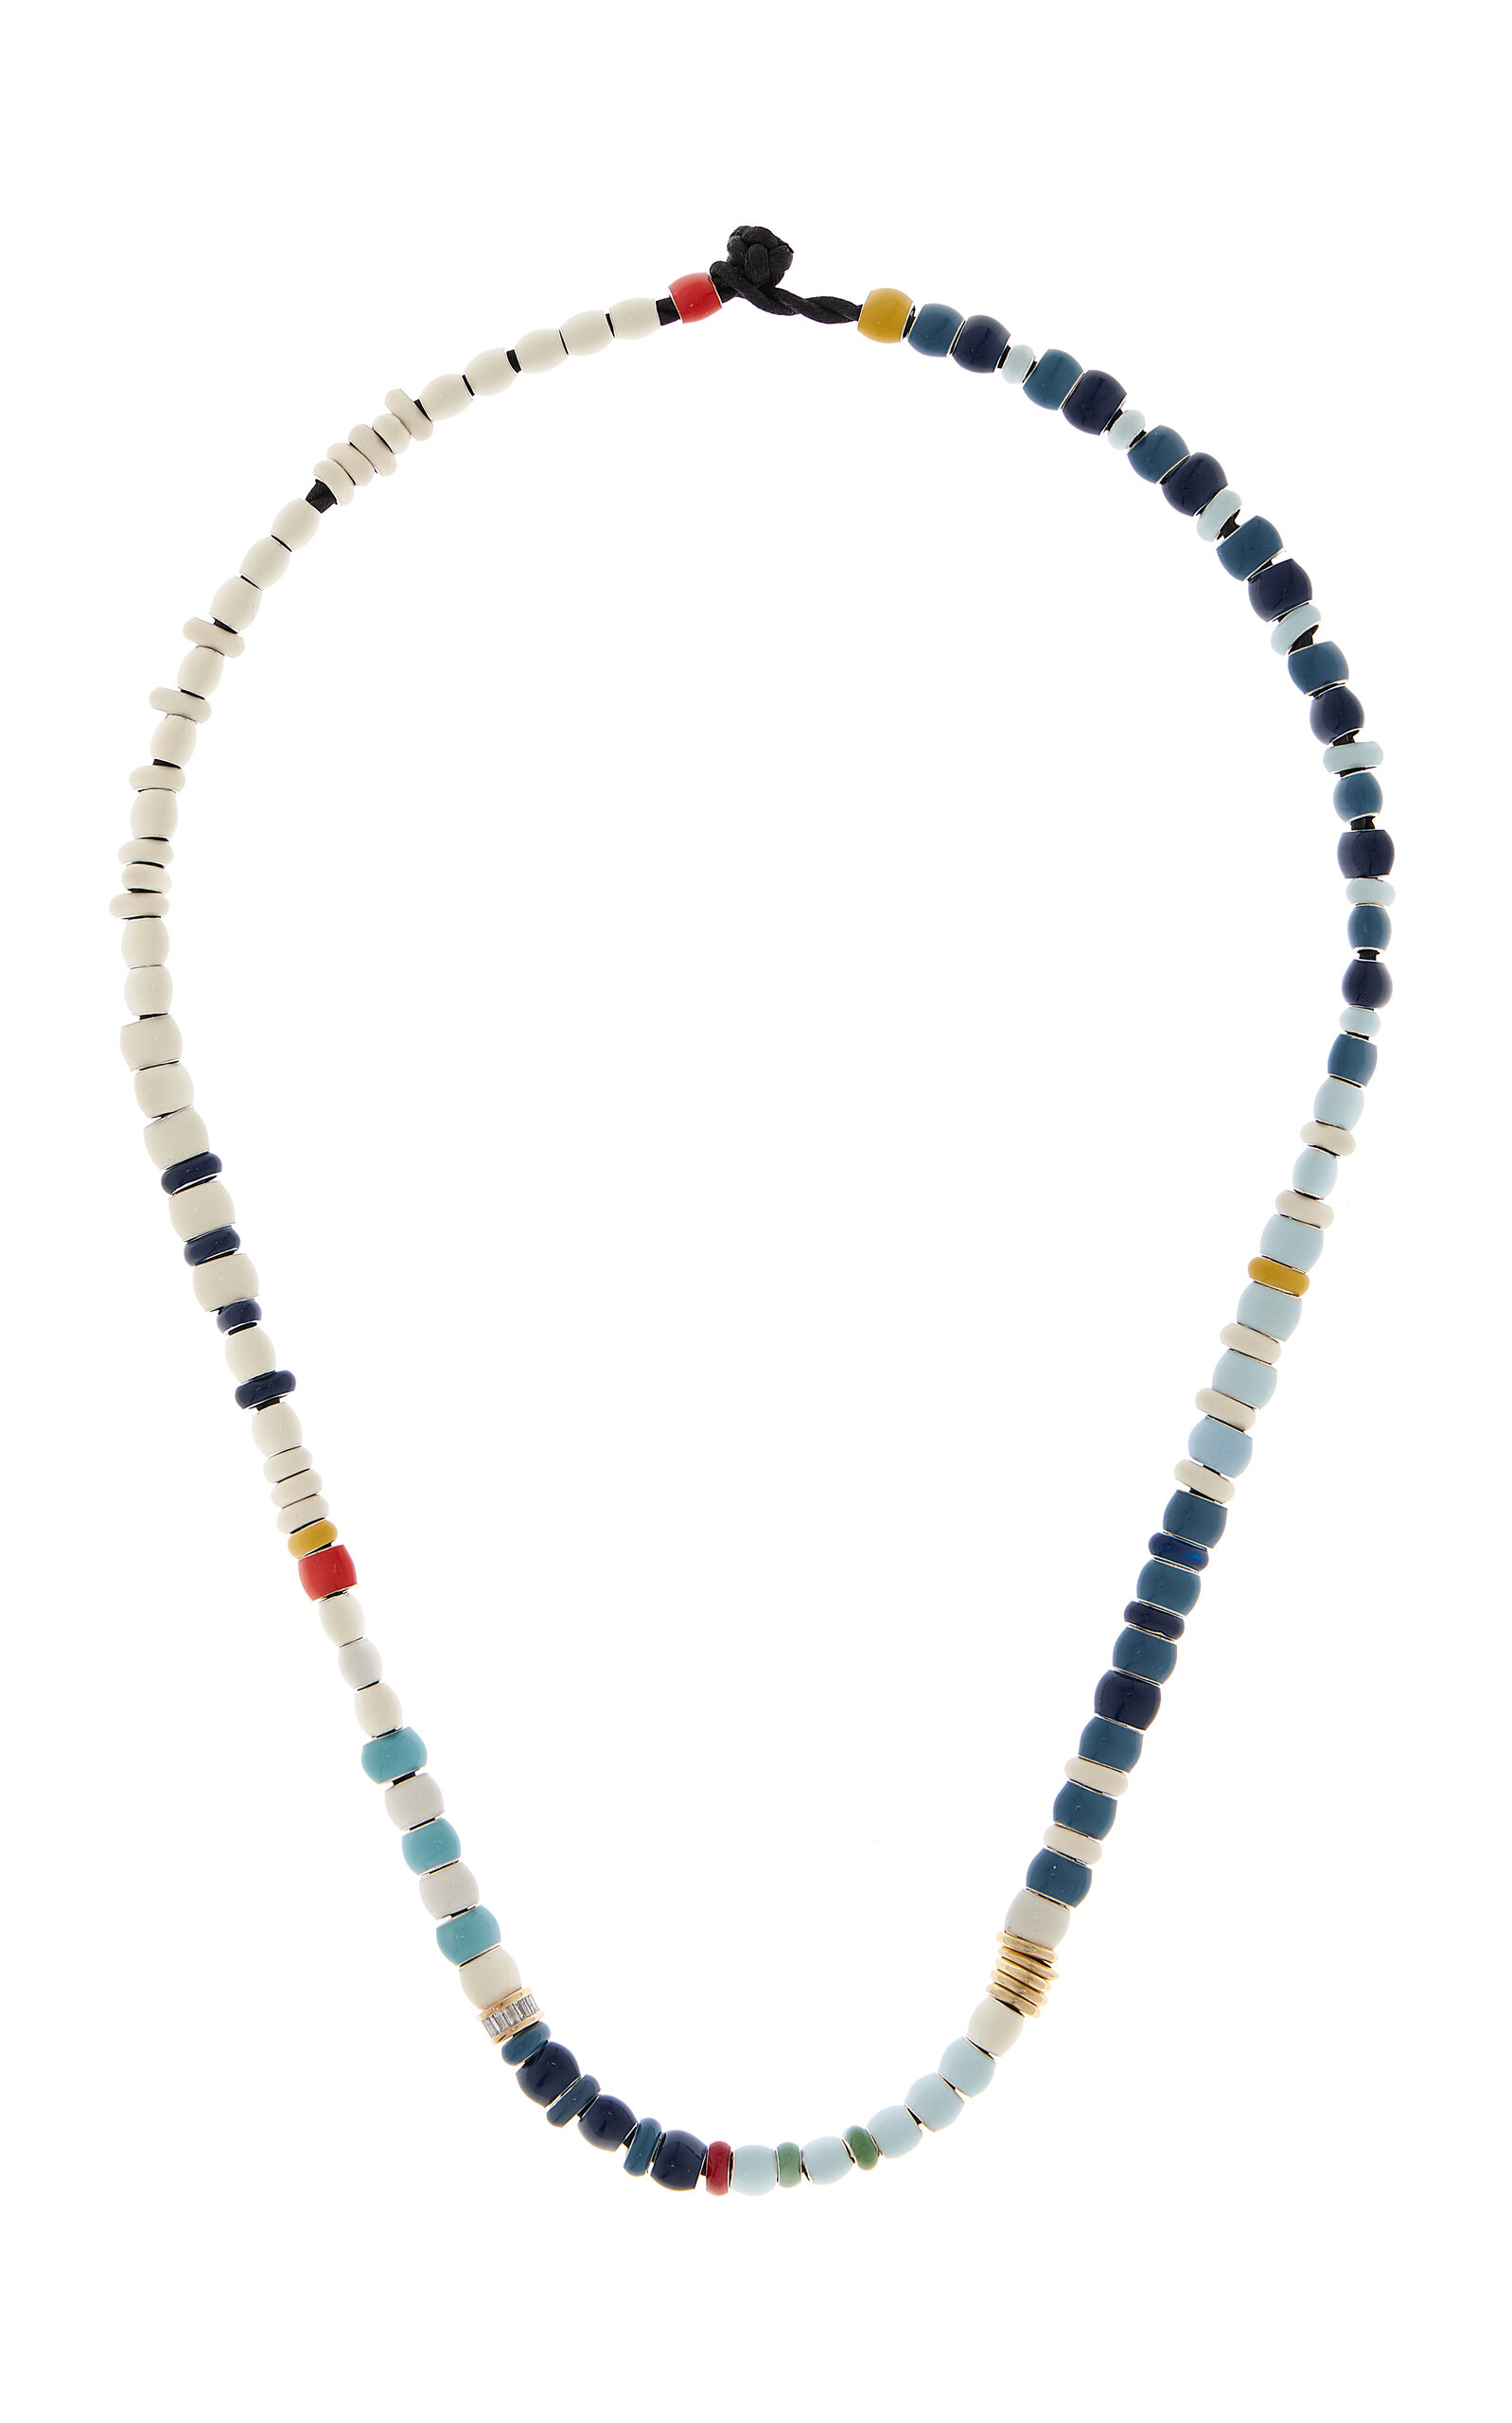 Exclusive Surf's Up 14K Yellow Gold Diamond Beaded Necklace